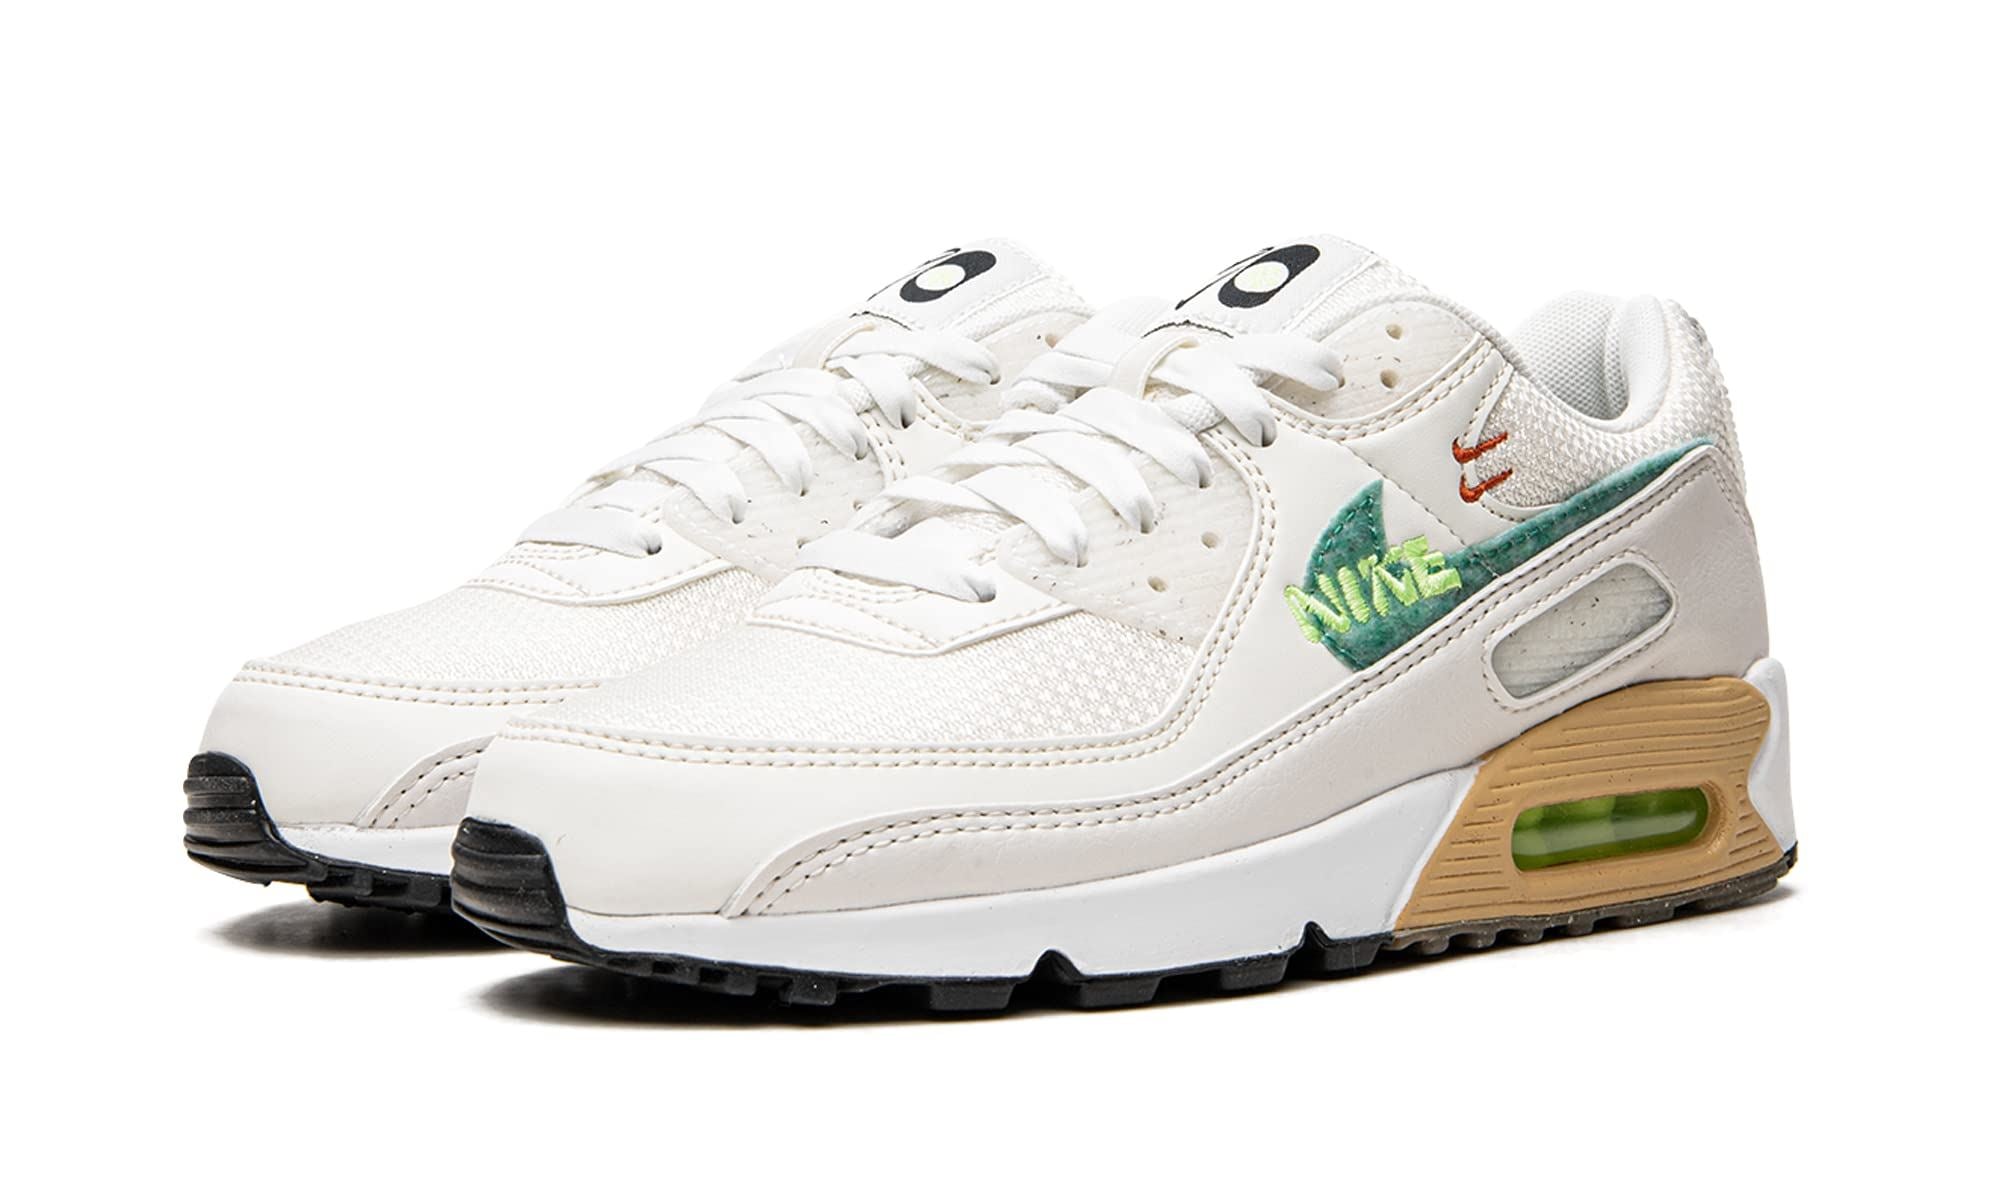 Nike Air Max 90 Summit White/Green Running Trainers Shoes DO9850 100 Women 8.5